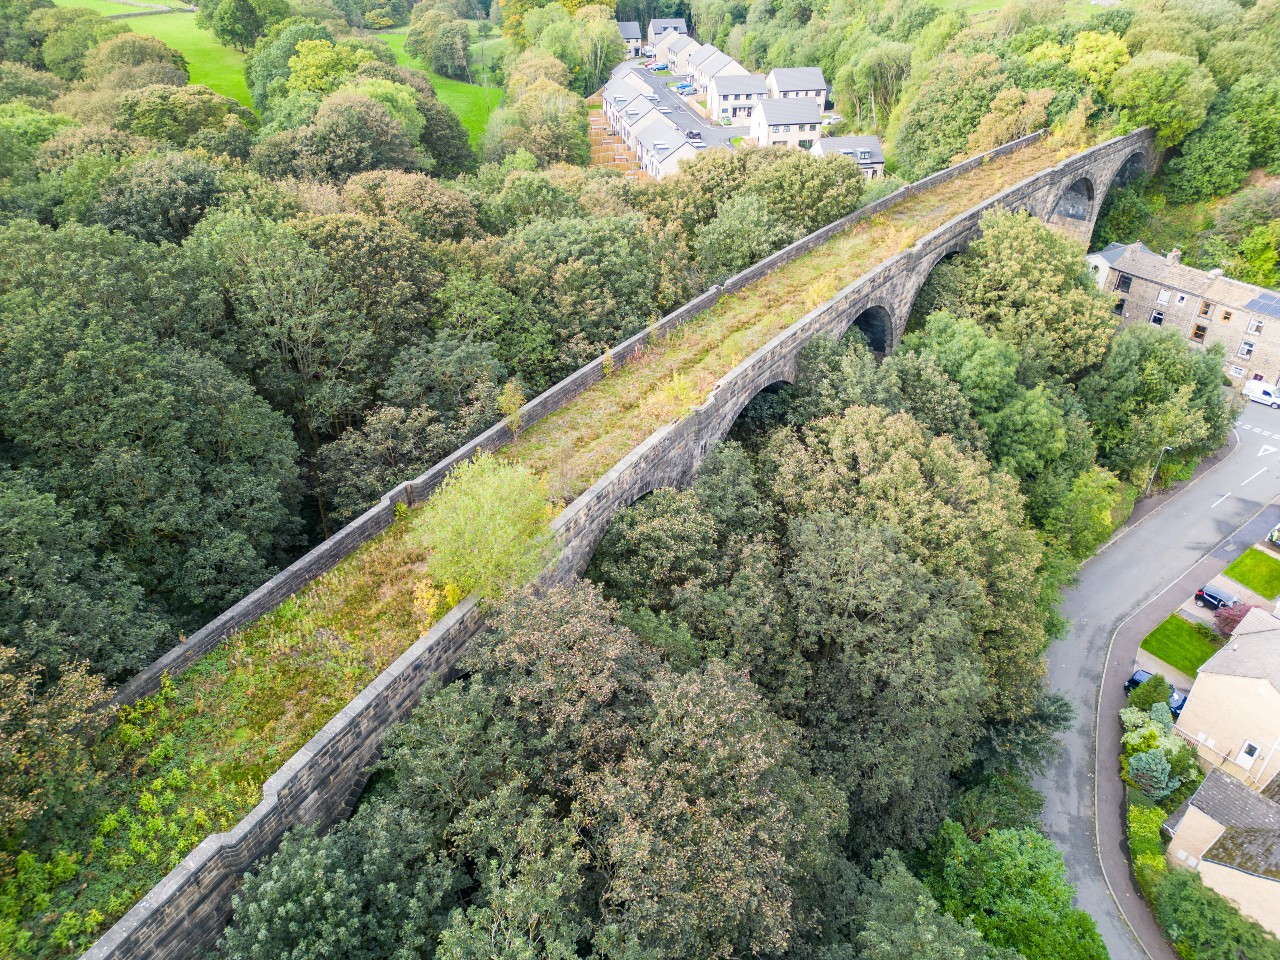 Viaduct hidden by excessive trees and vegetation in October 2023